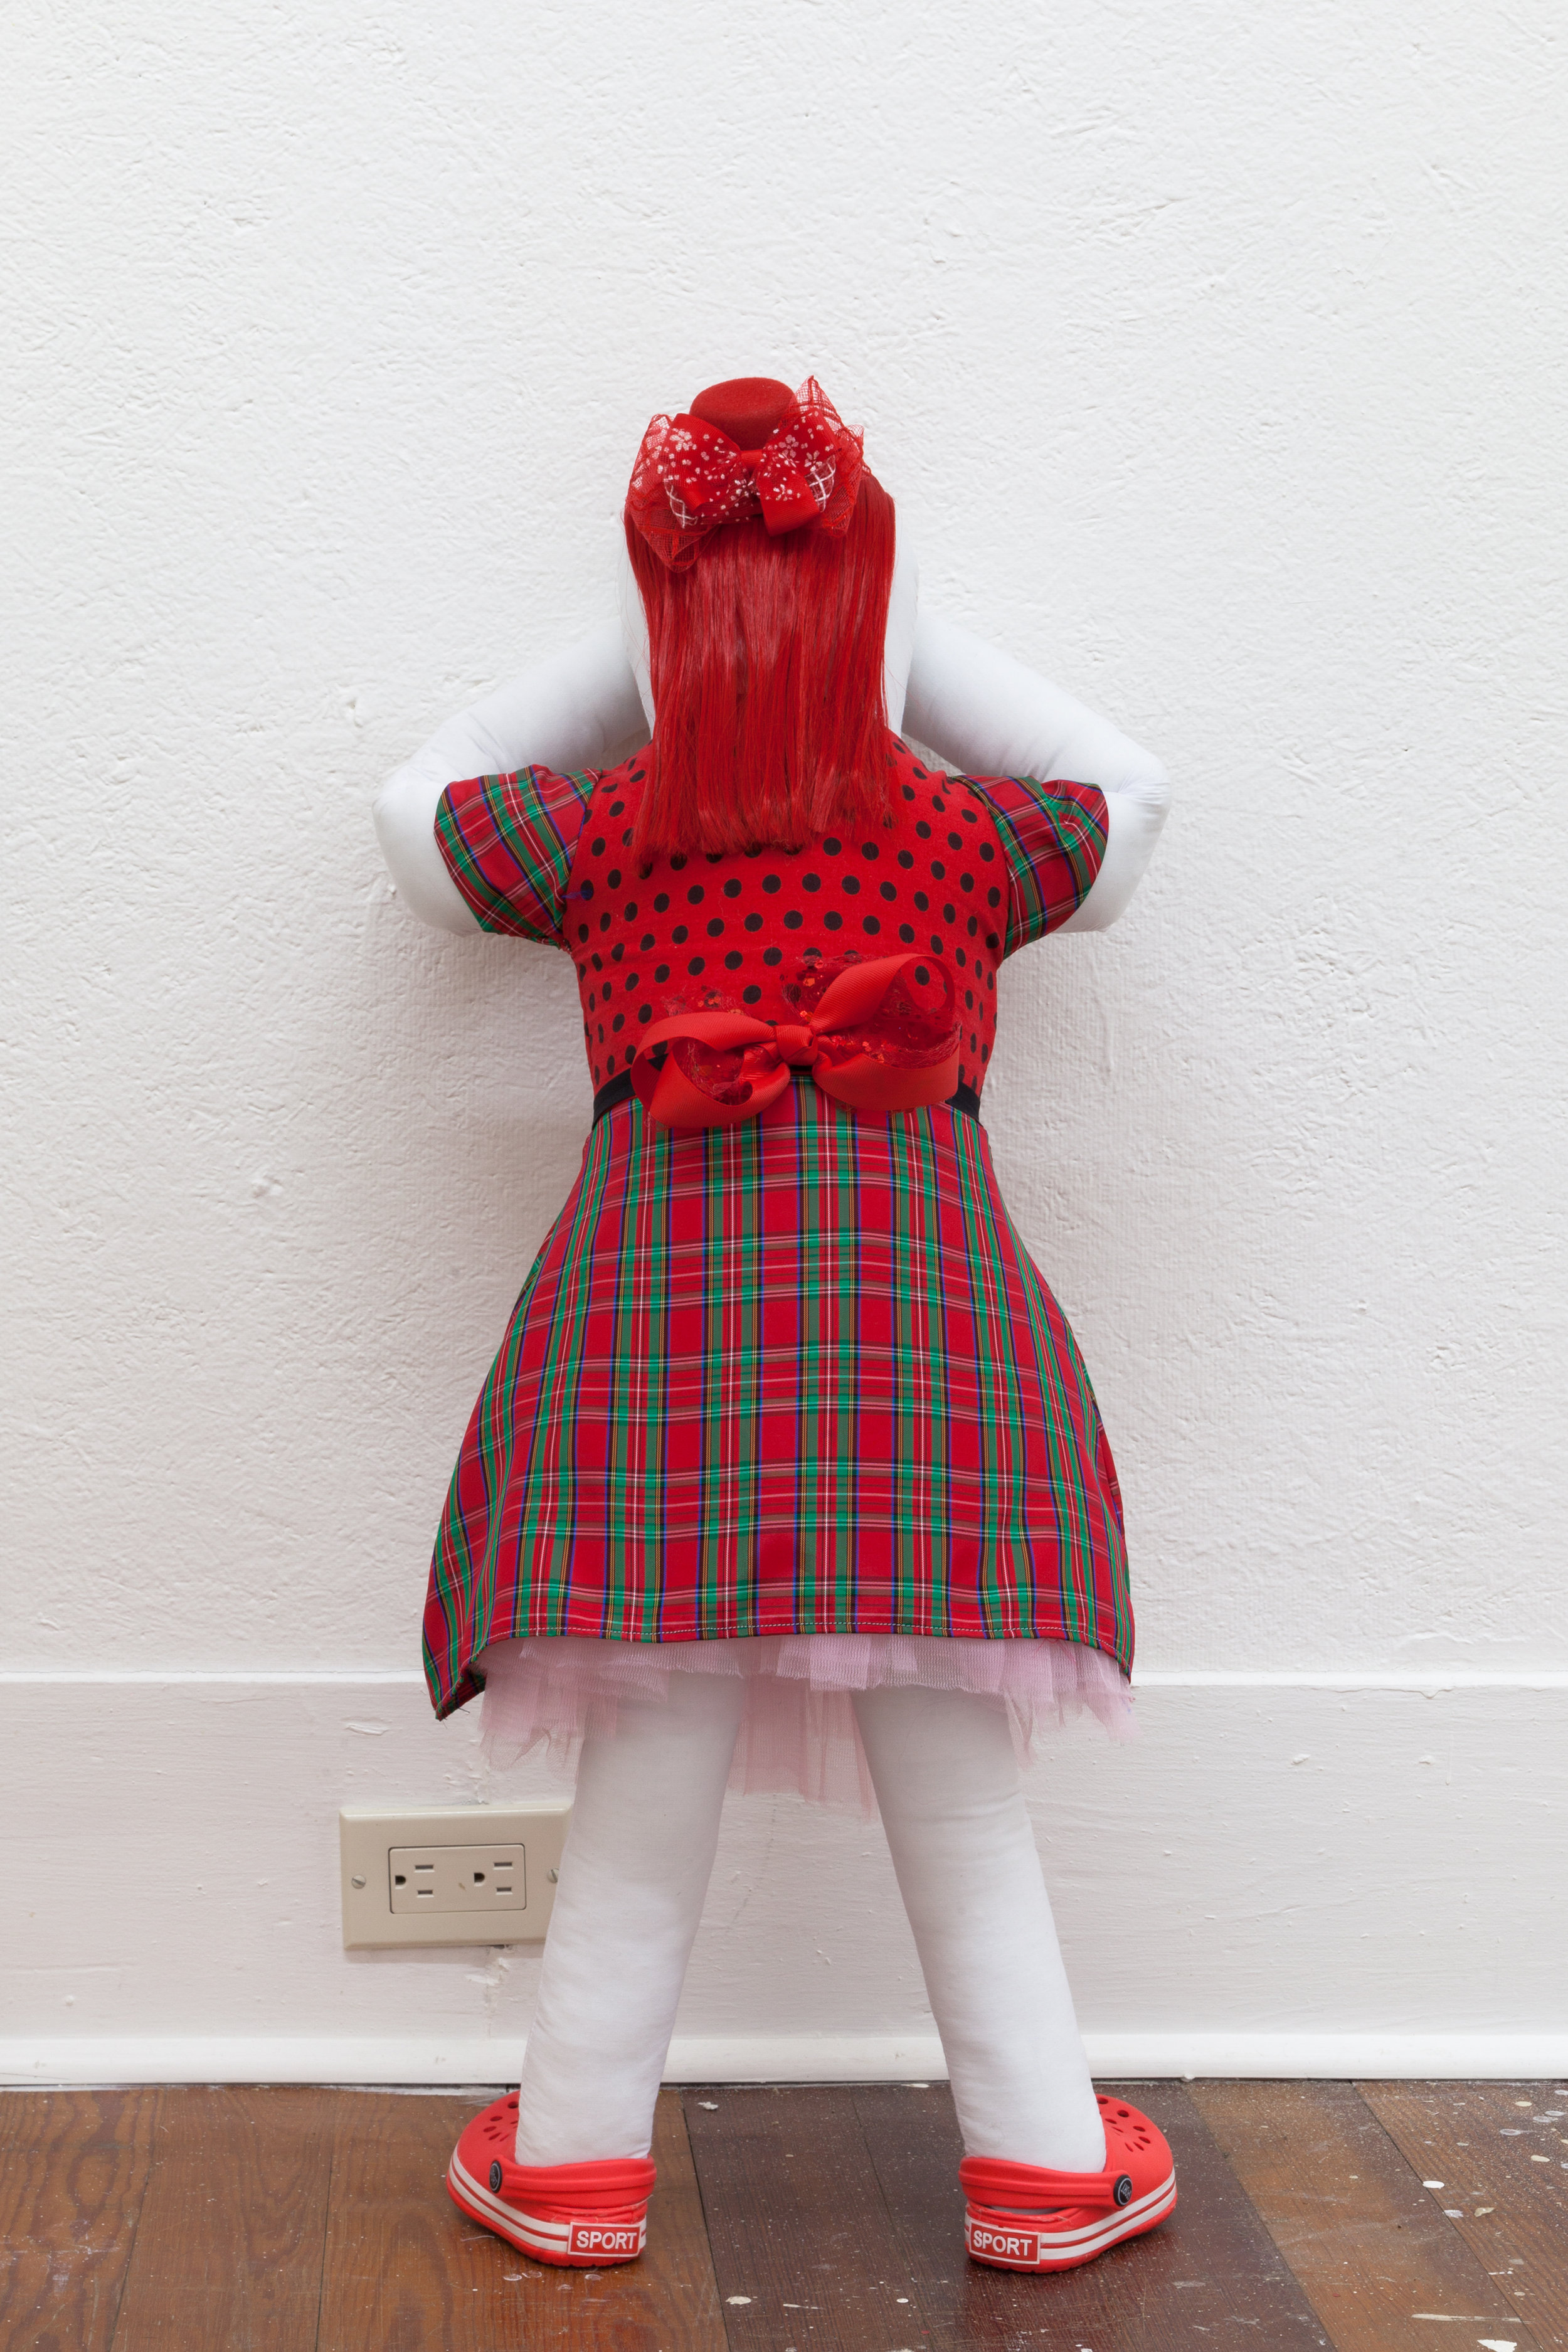  Abby Lloyd, Hadley, 2019, Fabric, Poly-Fil, ribbon, hair extensions, found materials Approximately 36 x 14 inches 